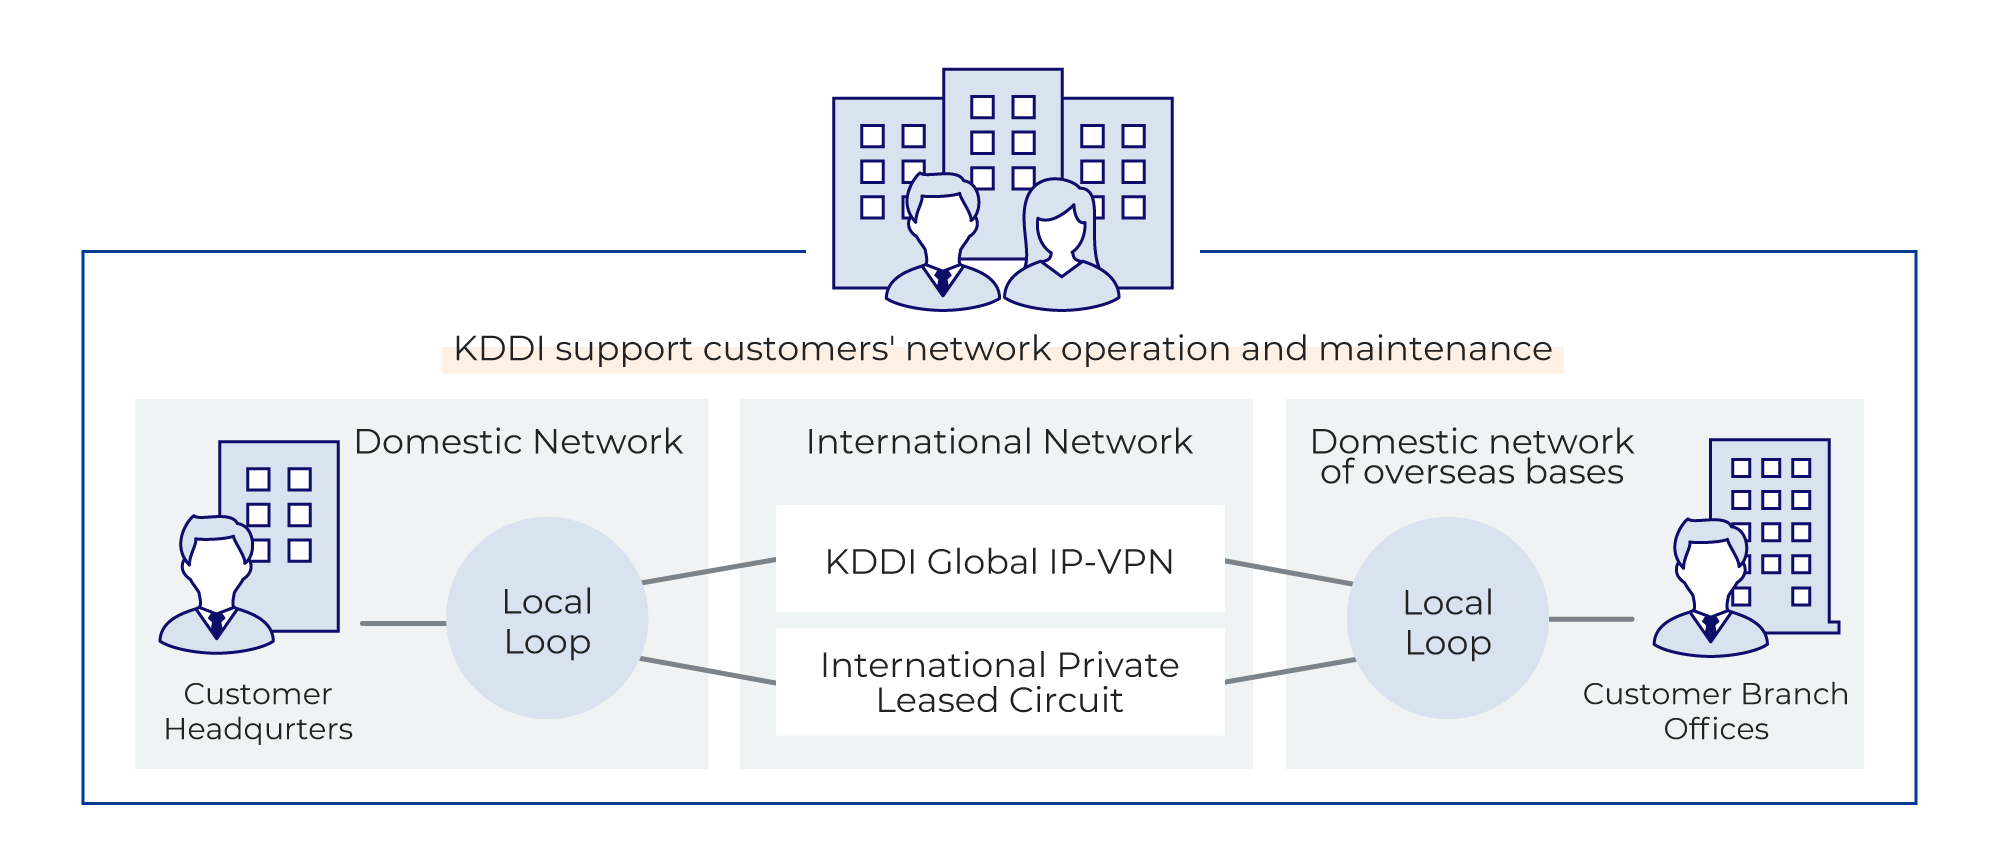 KDDI support customer's network operation and maintaince